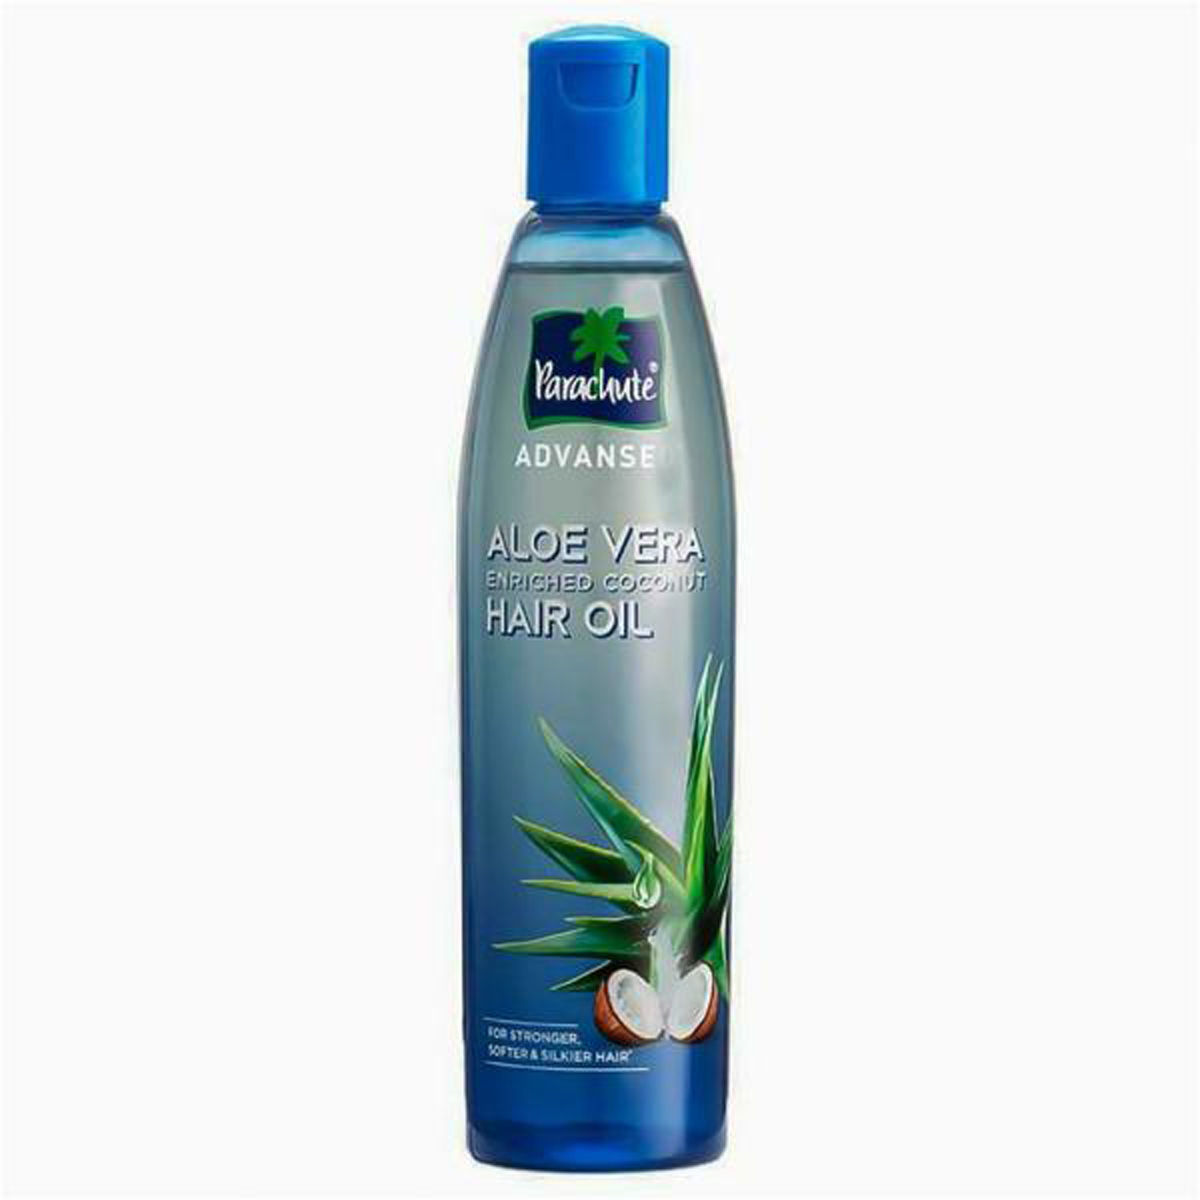 Parachute Aloe Vera Enriched Coconut Hair Oil, 250 ml Price, Uses, Side  Effects, Composition - Apollo Pharmacy